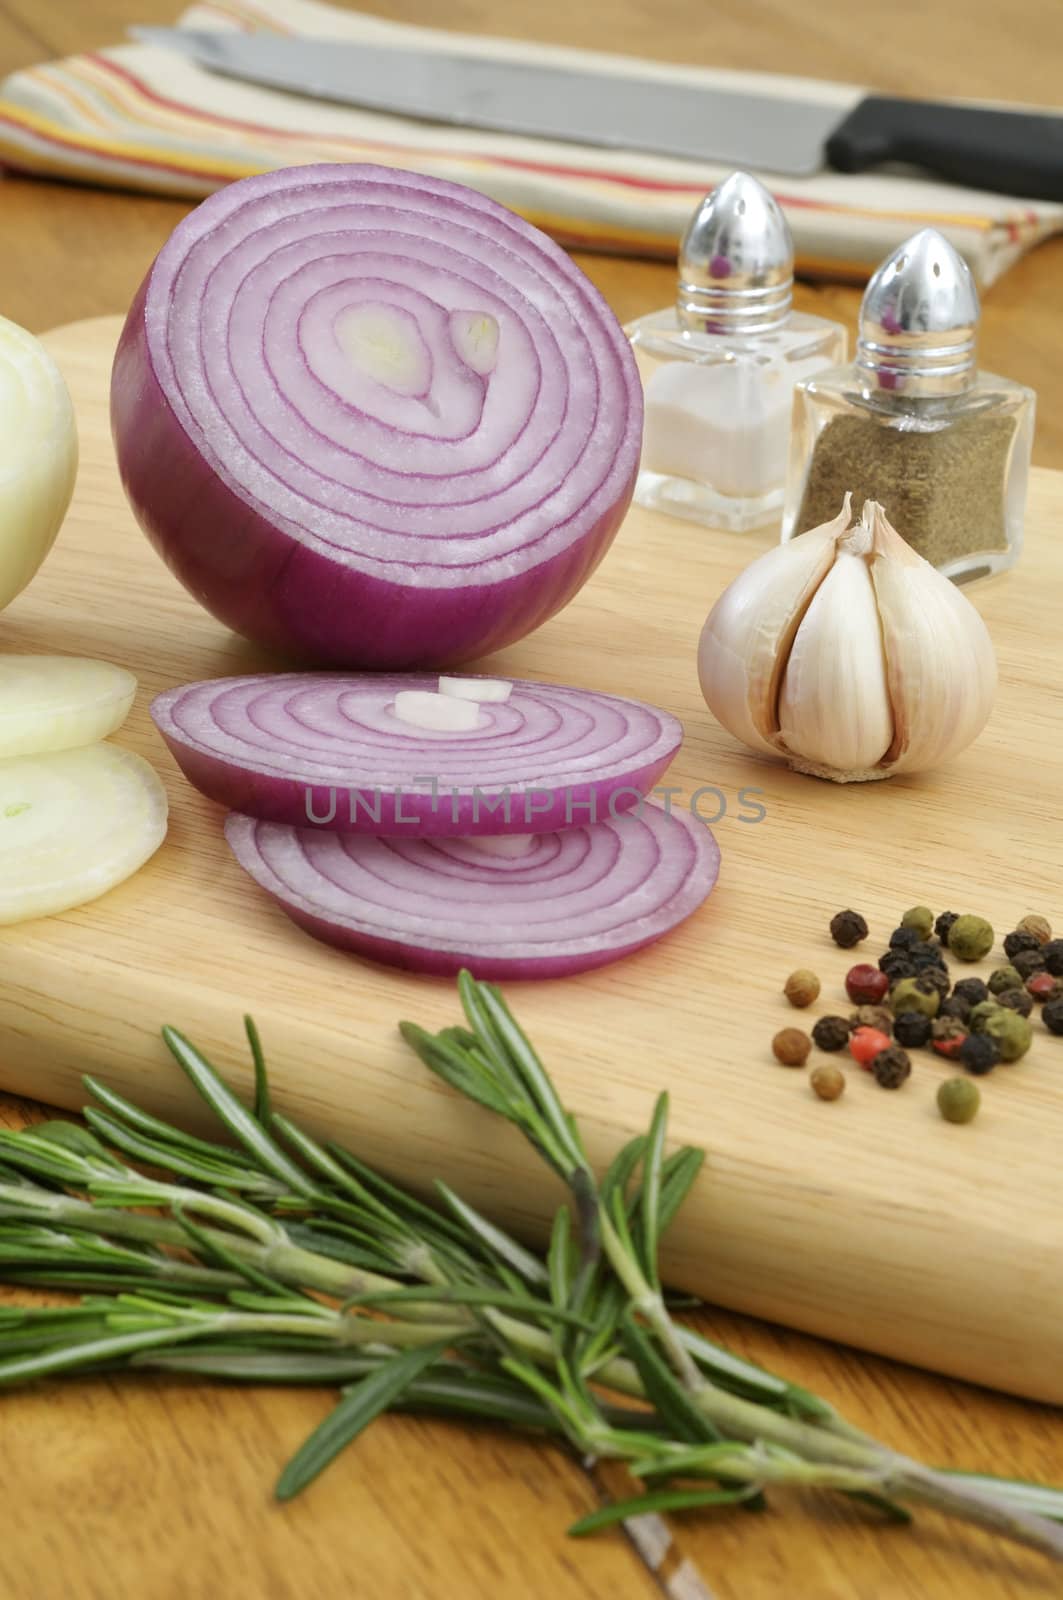 Seasoning ingredients on a chopping board in the kitchen - Focus on Spanish onion and garlic